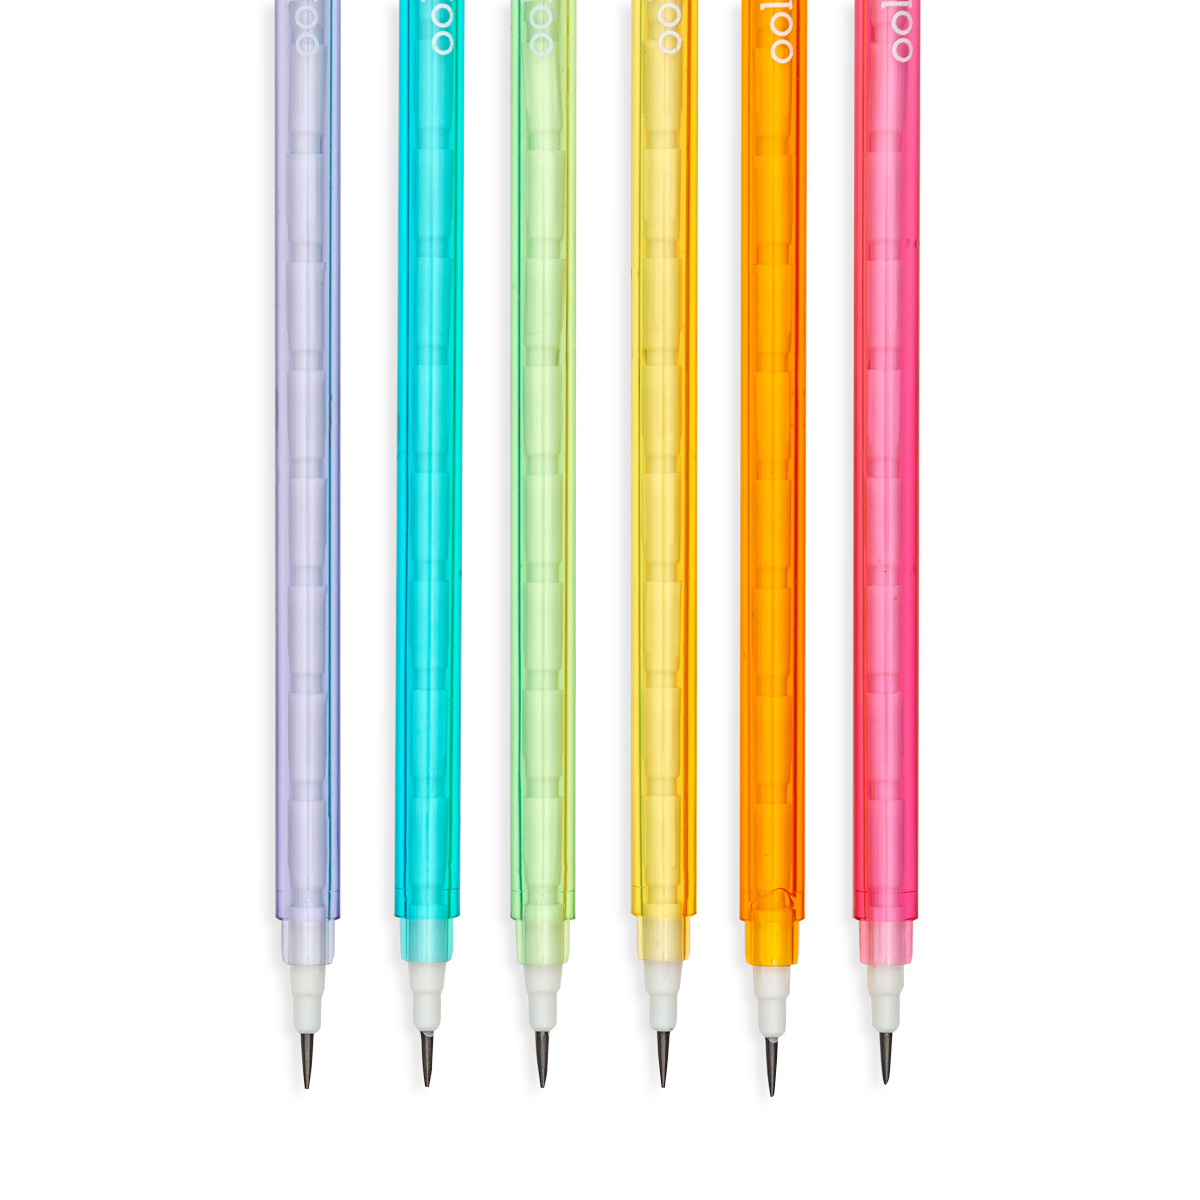 Stay Sharp Rainbow Mechanical Pencils showing the tips